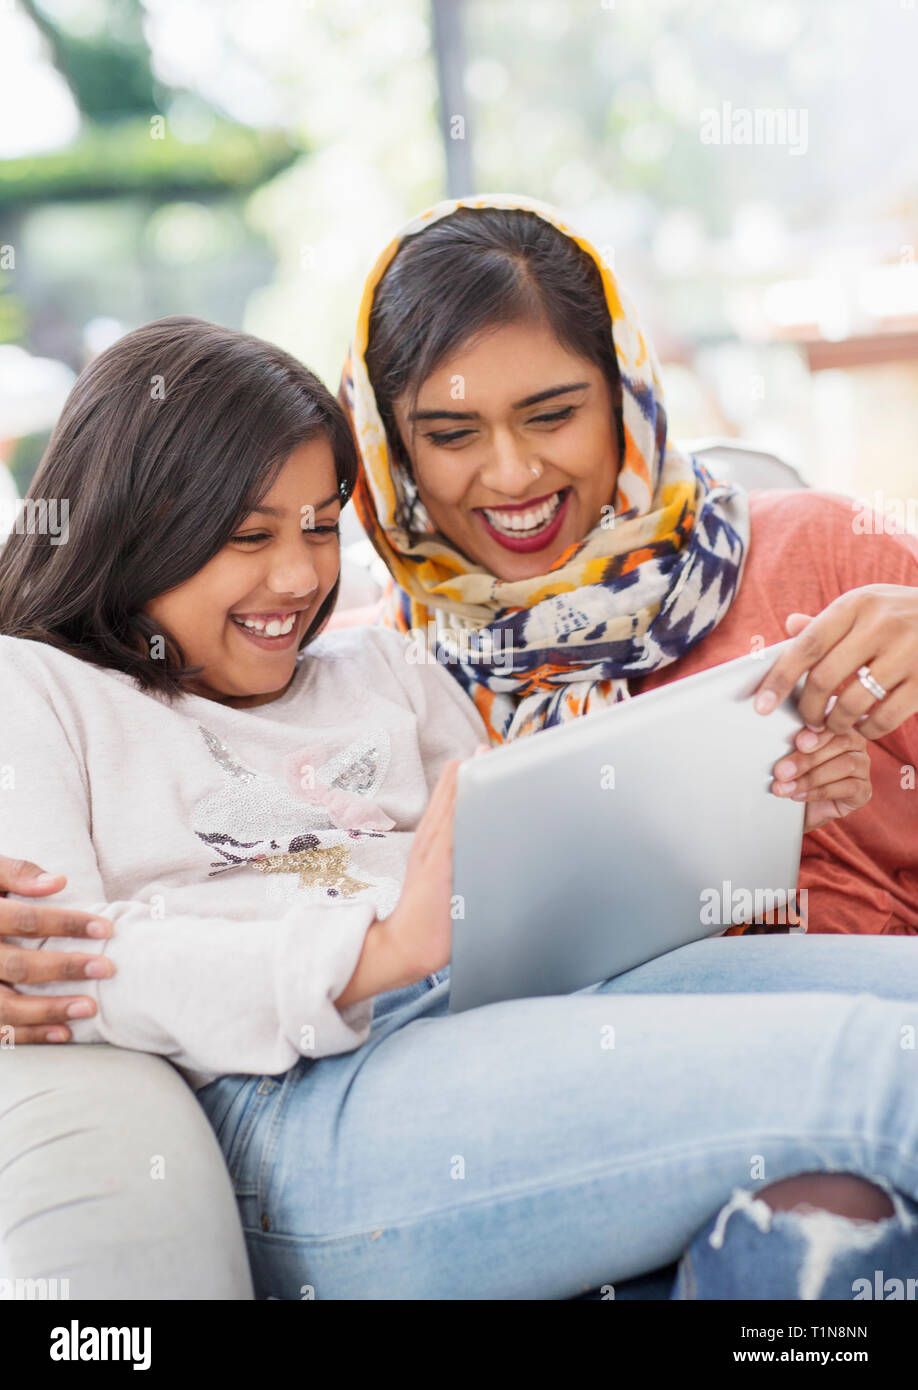 Laughing, happy mother in hijab and daughter using digital tablet Stock Photo